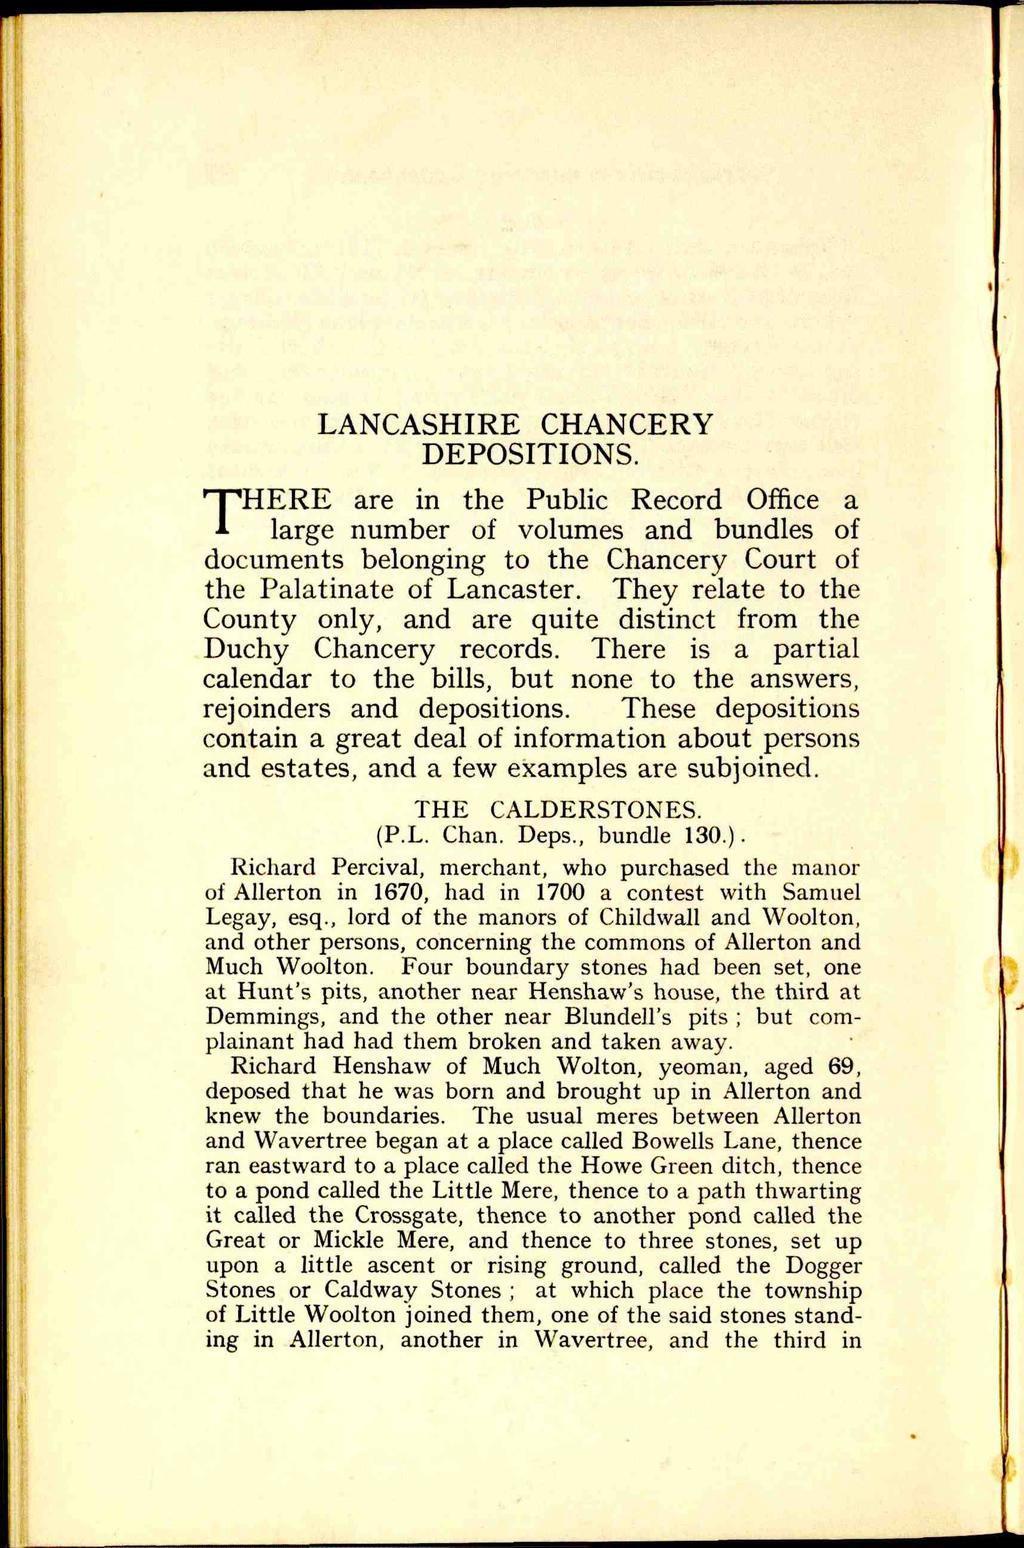 LANCASHIRE CHANCERY DEPOSITIONS. "THERE are in the Public Record Office a A large number of volumes and bundles of documents belonging to the Chancery Court of the Palatinate of Lancaster.